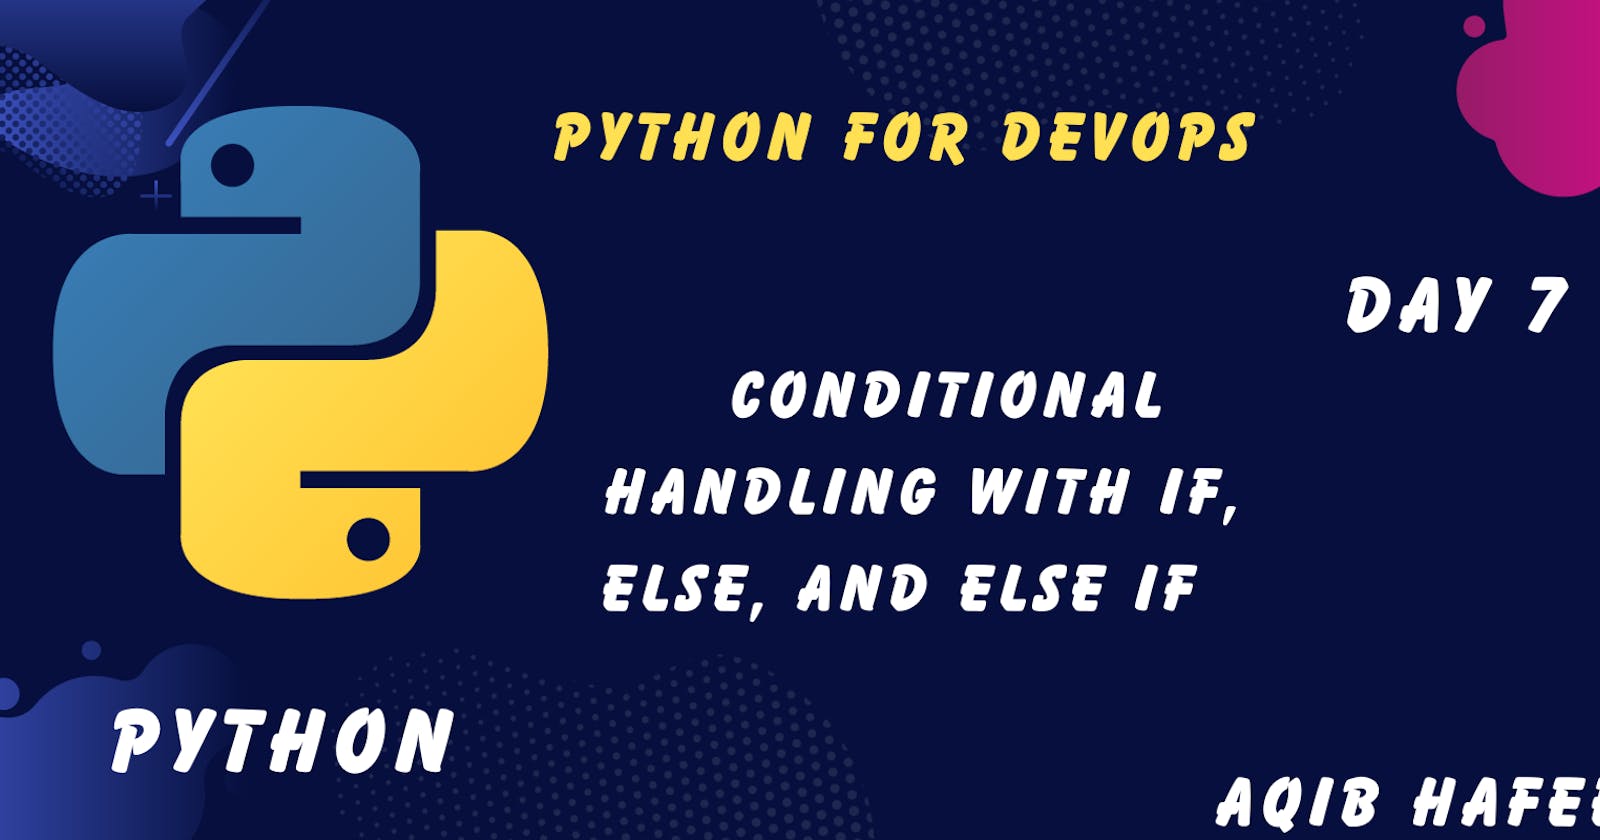 Day 7: Conditional Handling with IF, ELSE, and ELSE IF in Python for DevOps